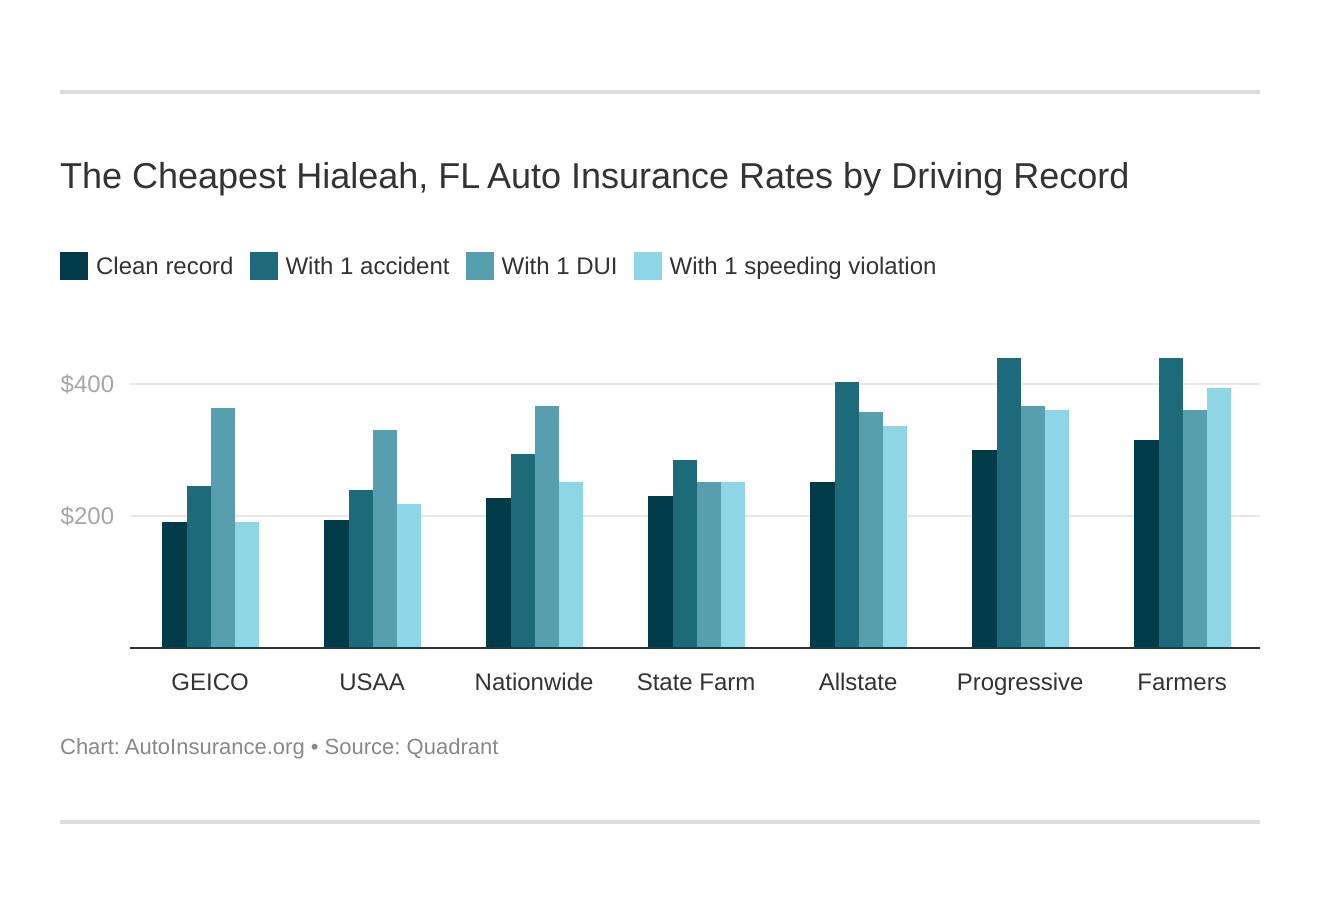 The Cheapest Hialeah, FL Auto Insurance Rates by Driving Record